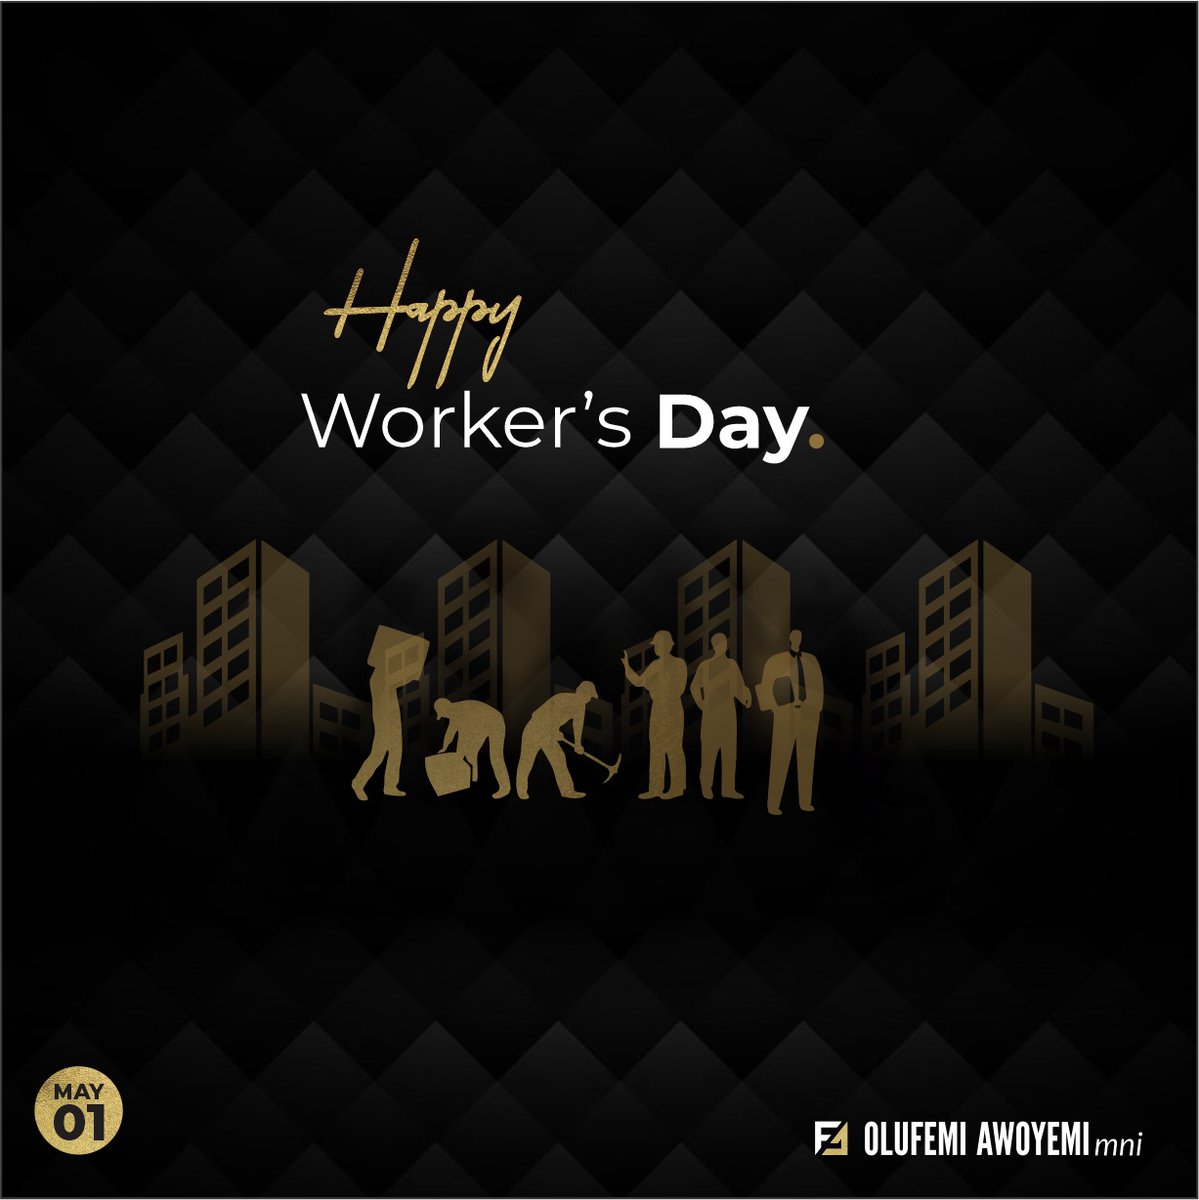 'You don't have to preserve your pain in order to prove that it was real.' - Brittany Burgunder #HappyWorkersDay